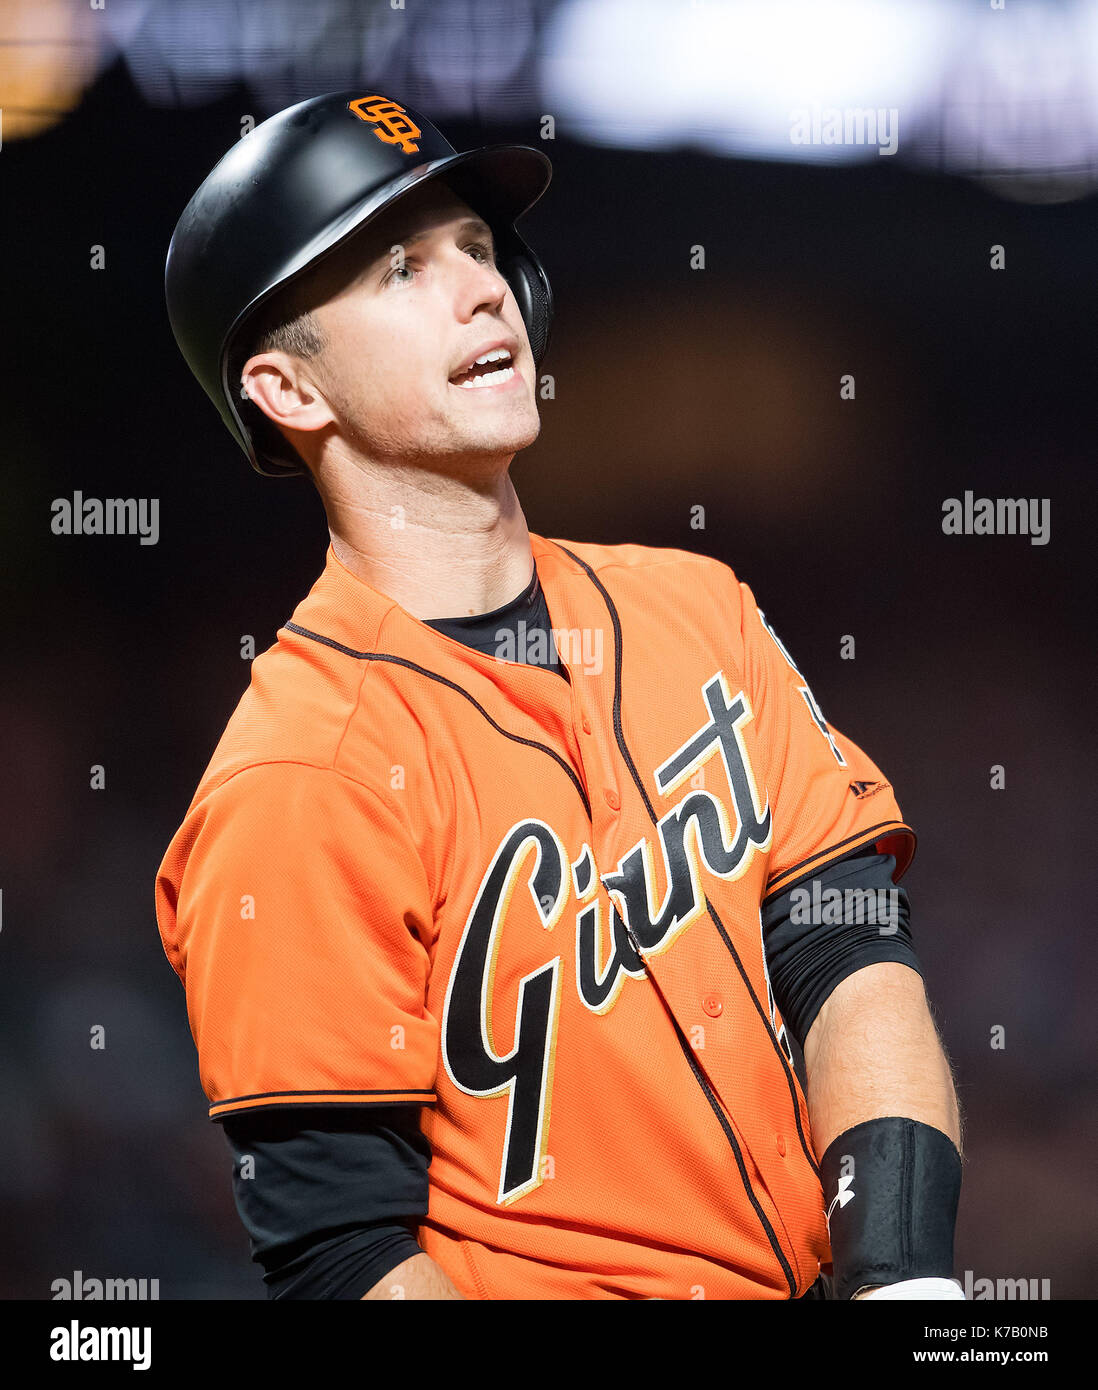 San Francisco, California, USA. 15th Sep, 2017. San Francisco Giants first baseman Buster Posey (28) watches his ball go foul in the first inning, during a MLB game between the Arizona Diamondbacks and the San Francisco Giants at AT&T Park in San Francisco, California. Valerie Shoaps/CSM/Alamy Live News Stock Photo